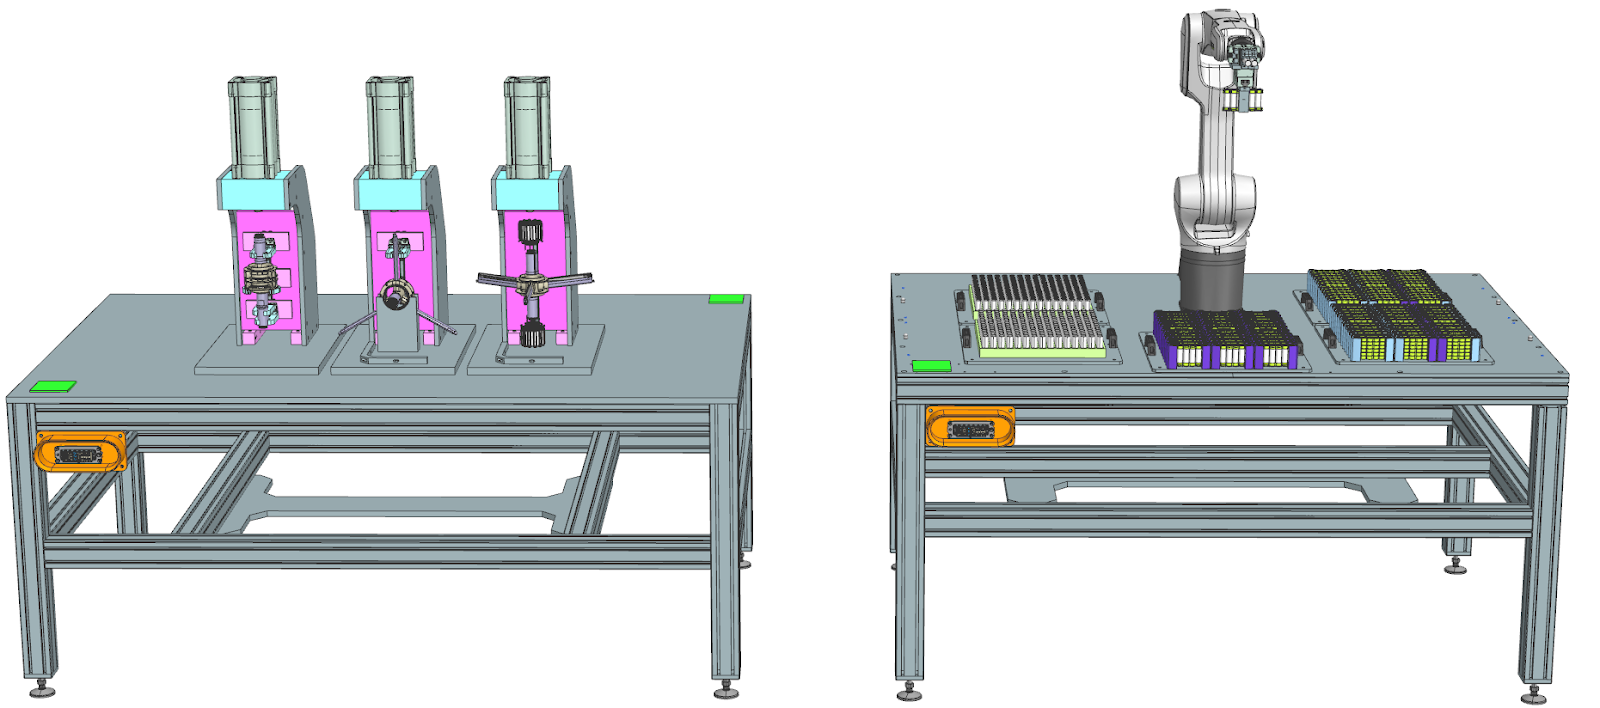 An example of such modules is a pneumatic press assembly module (left) or a robot battery model assembly module (right).